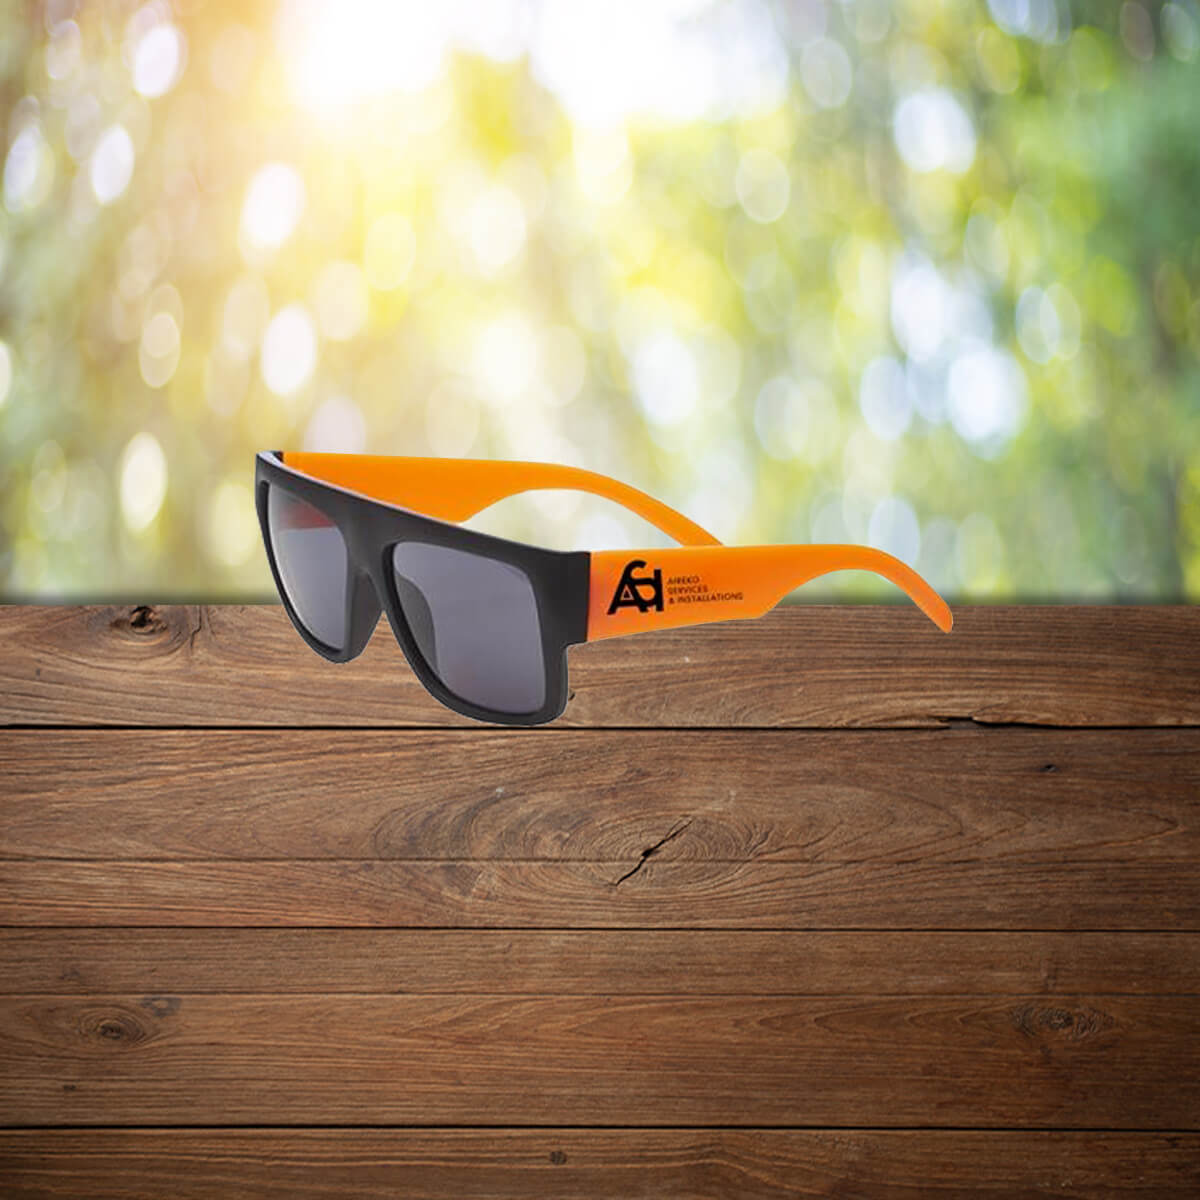 Orange thick arm black branded sunglasses promotional wellness & safety by curative printing